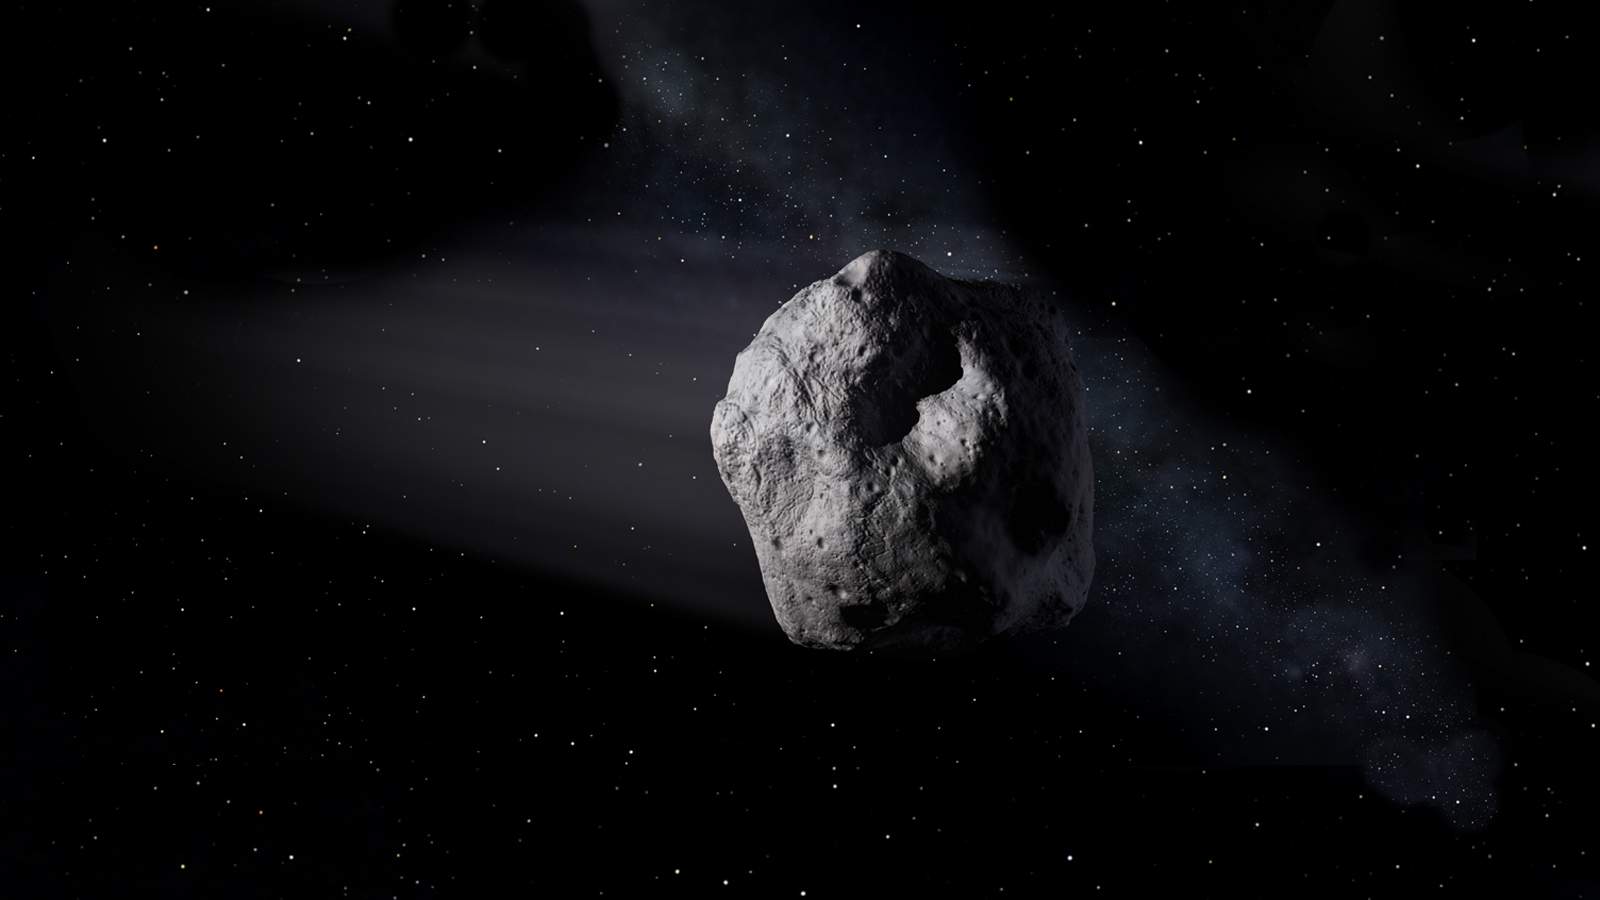 Stadium-sized asteroid will pass by Earth on Saturday